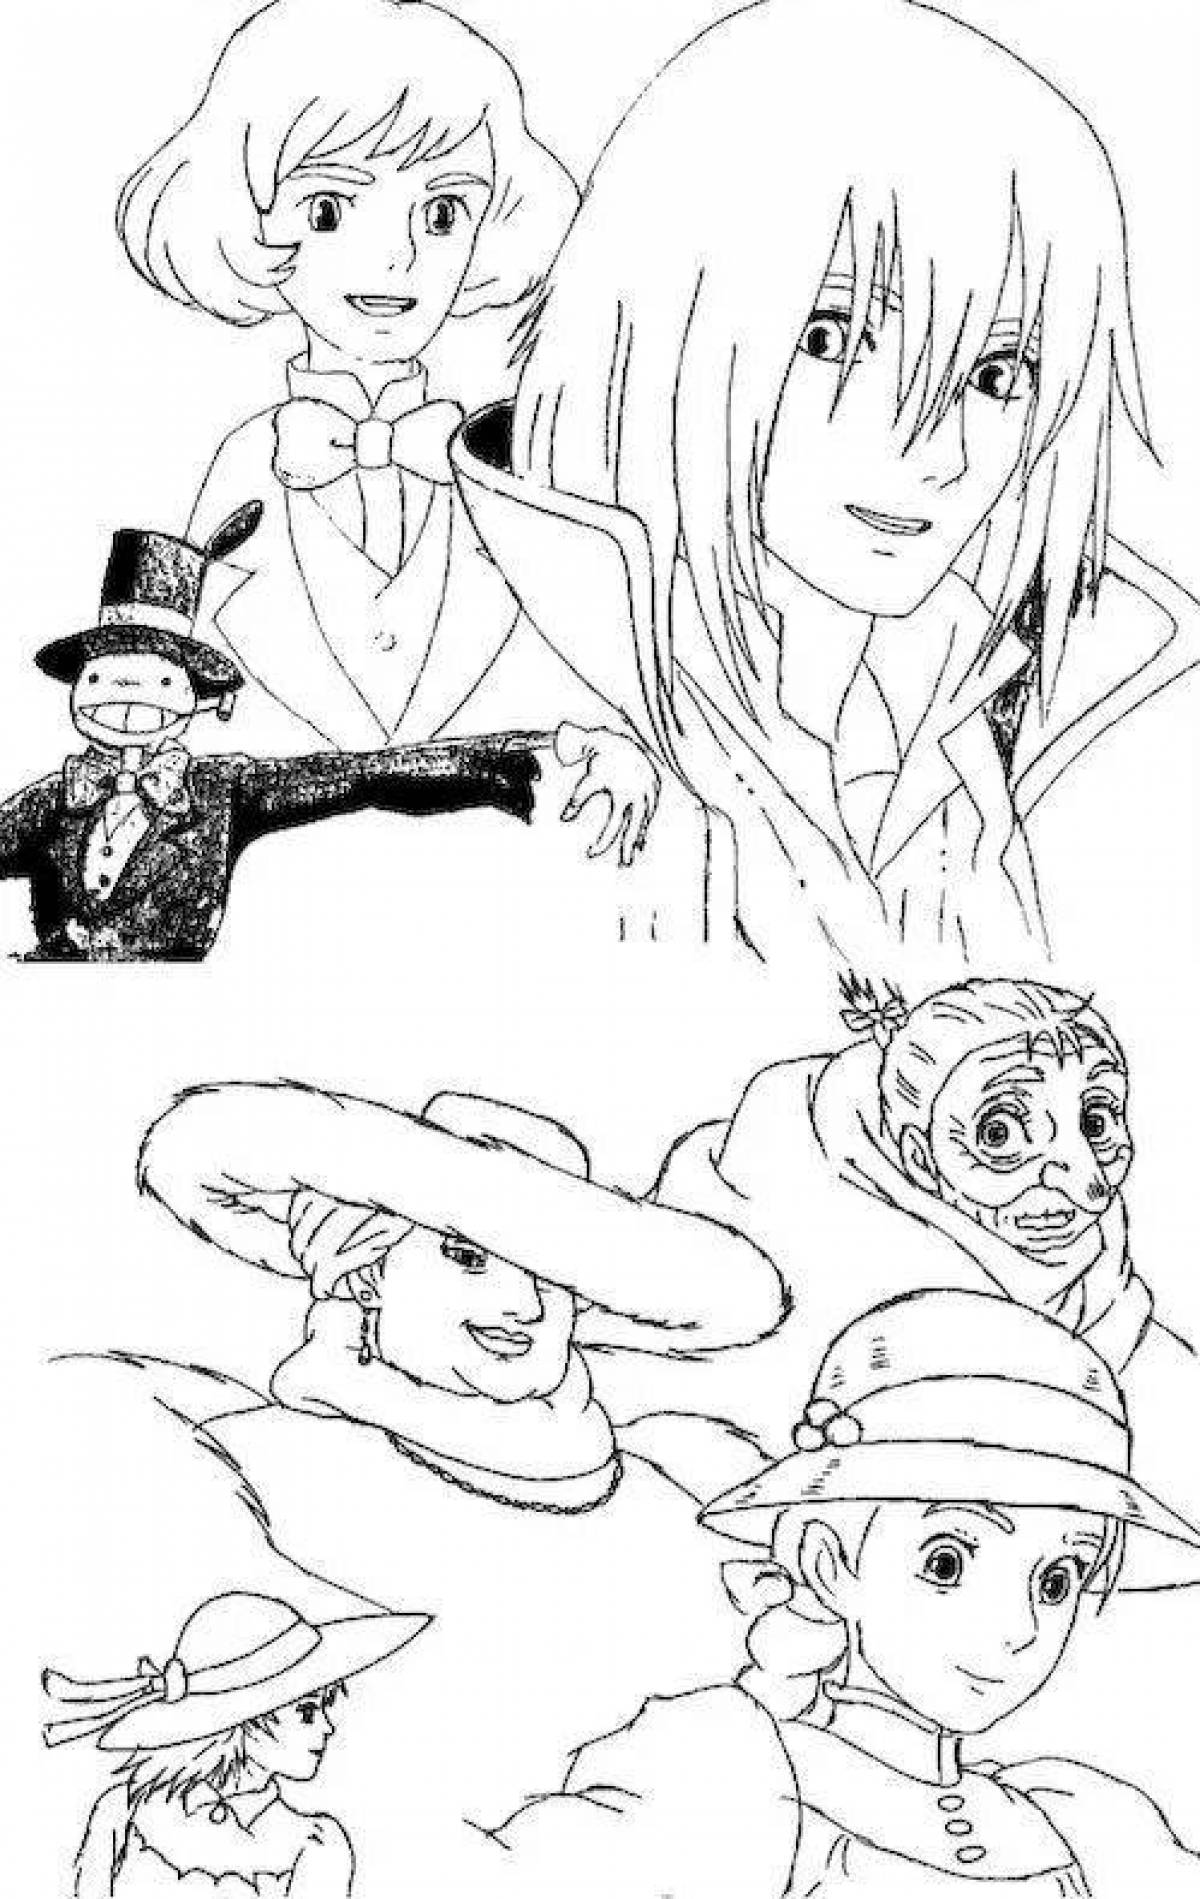 Awesome howl's moving castle coloring page